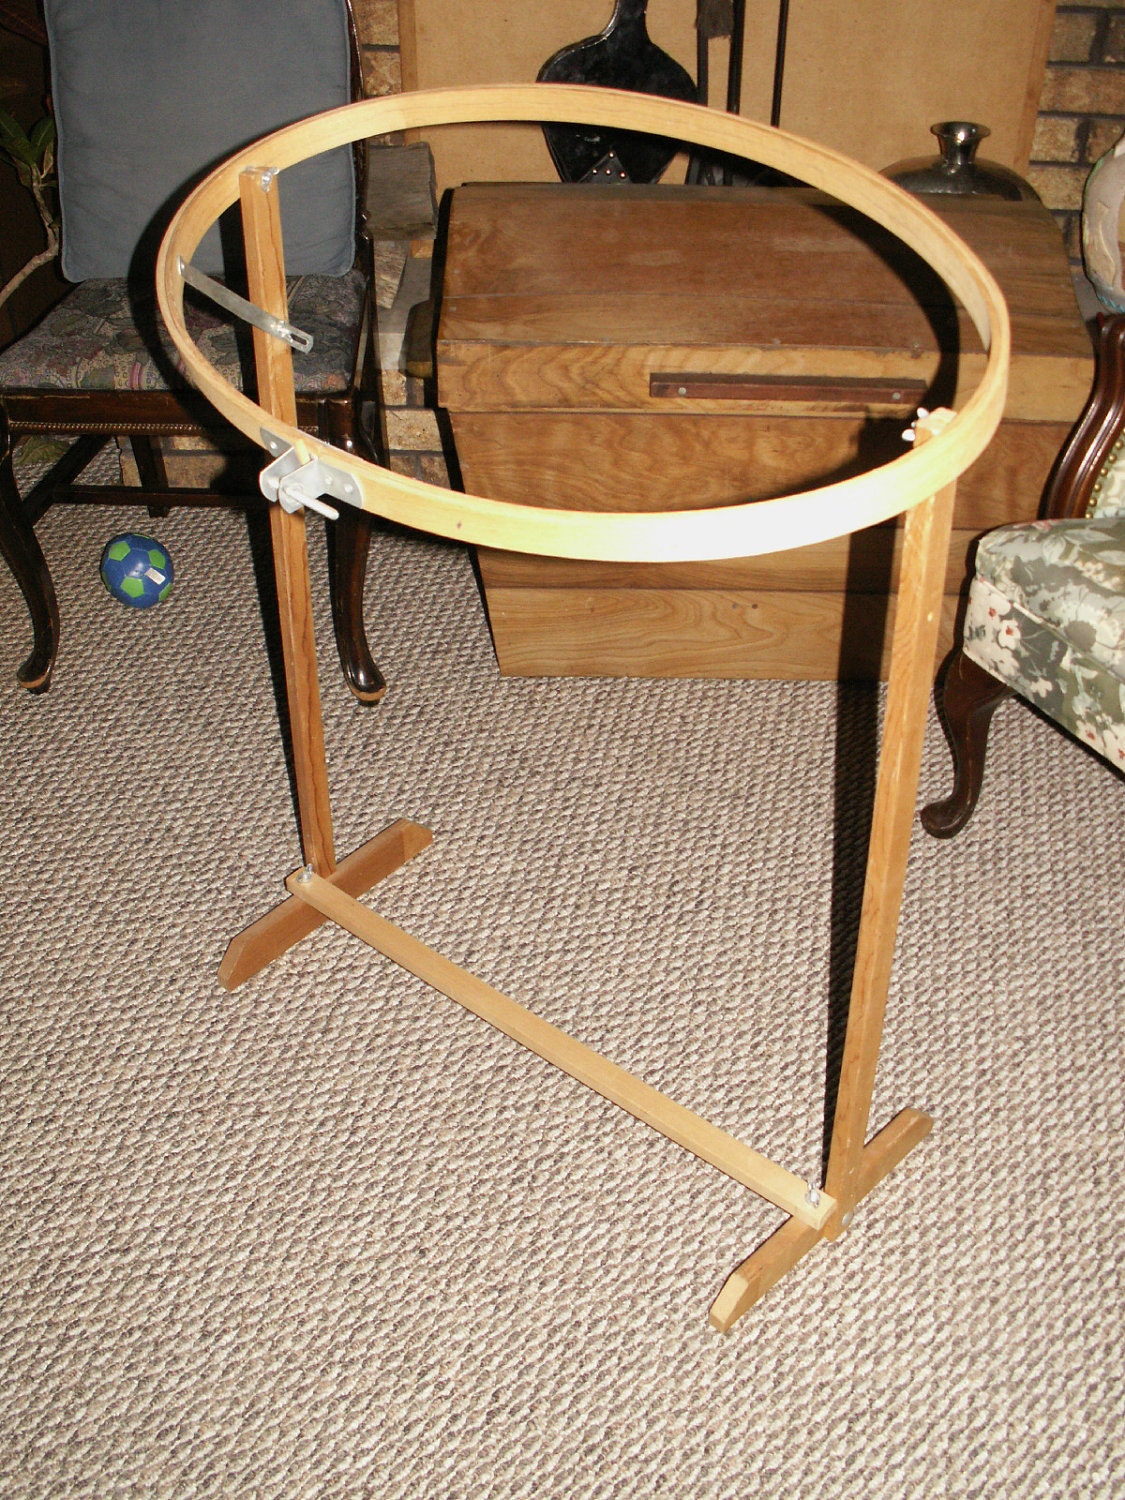 quilting stand embroidery oval hoop wood